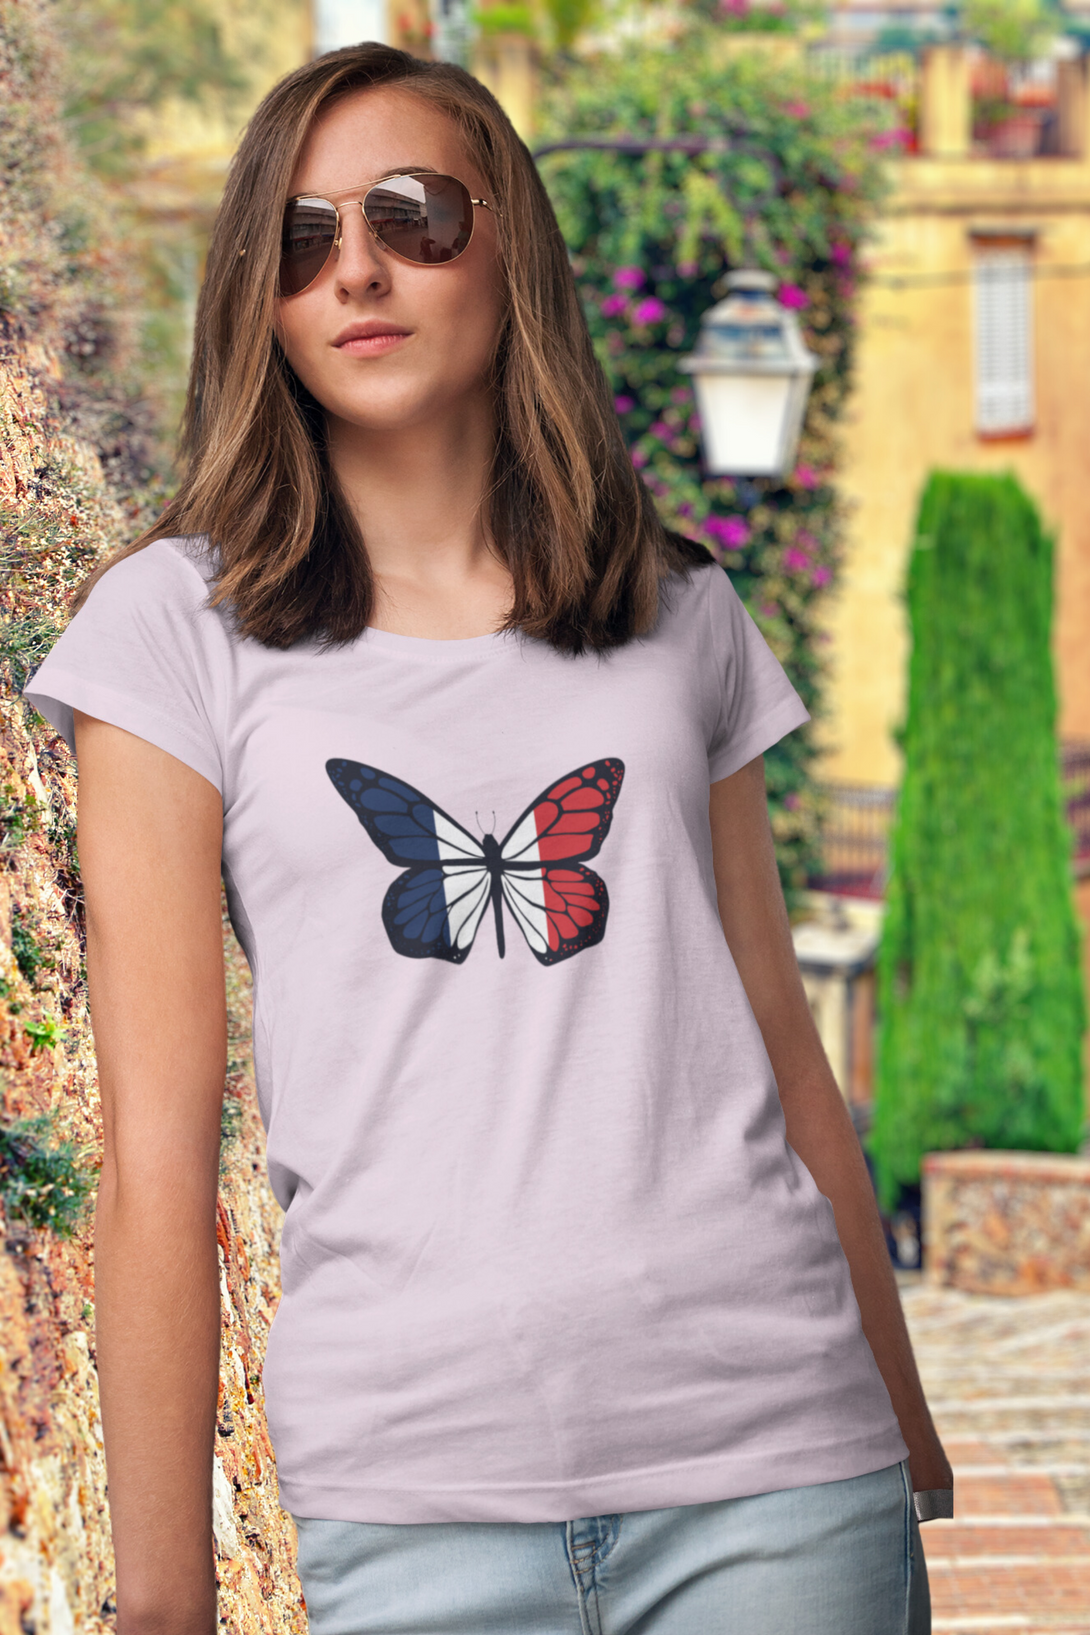 French Butterfly Printed Scoop Neck T-Shirt For Women - WowWaves - 3